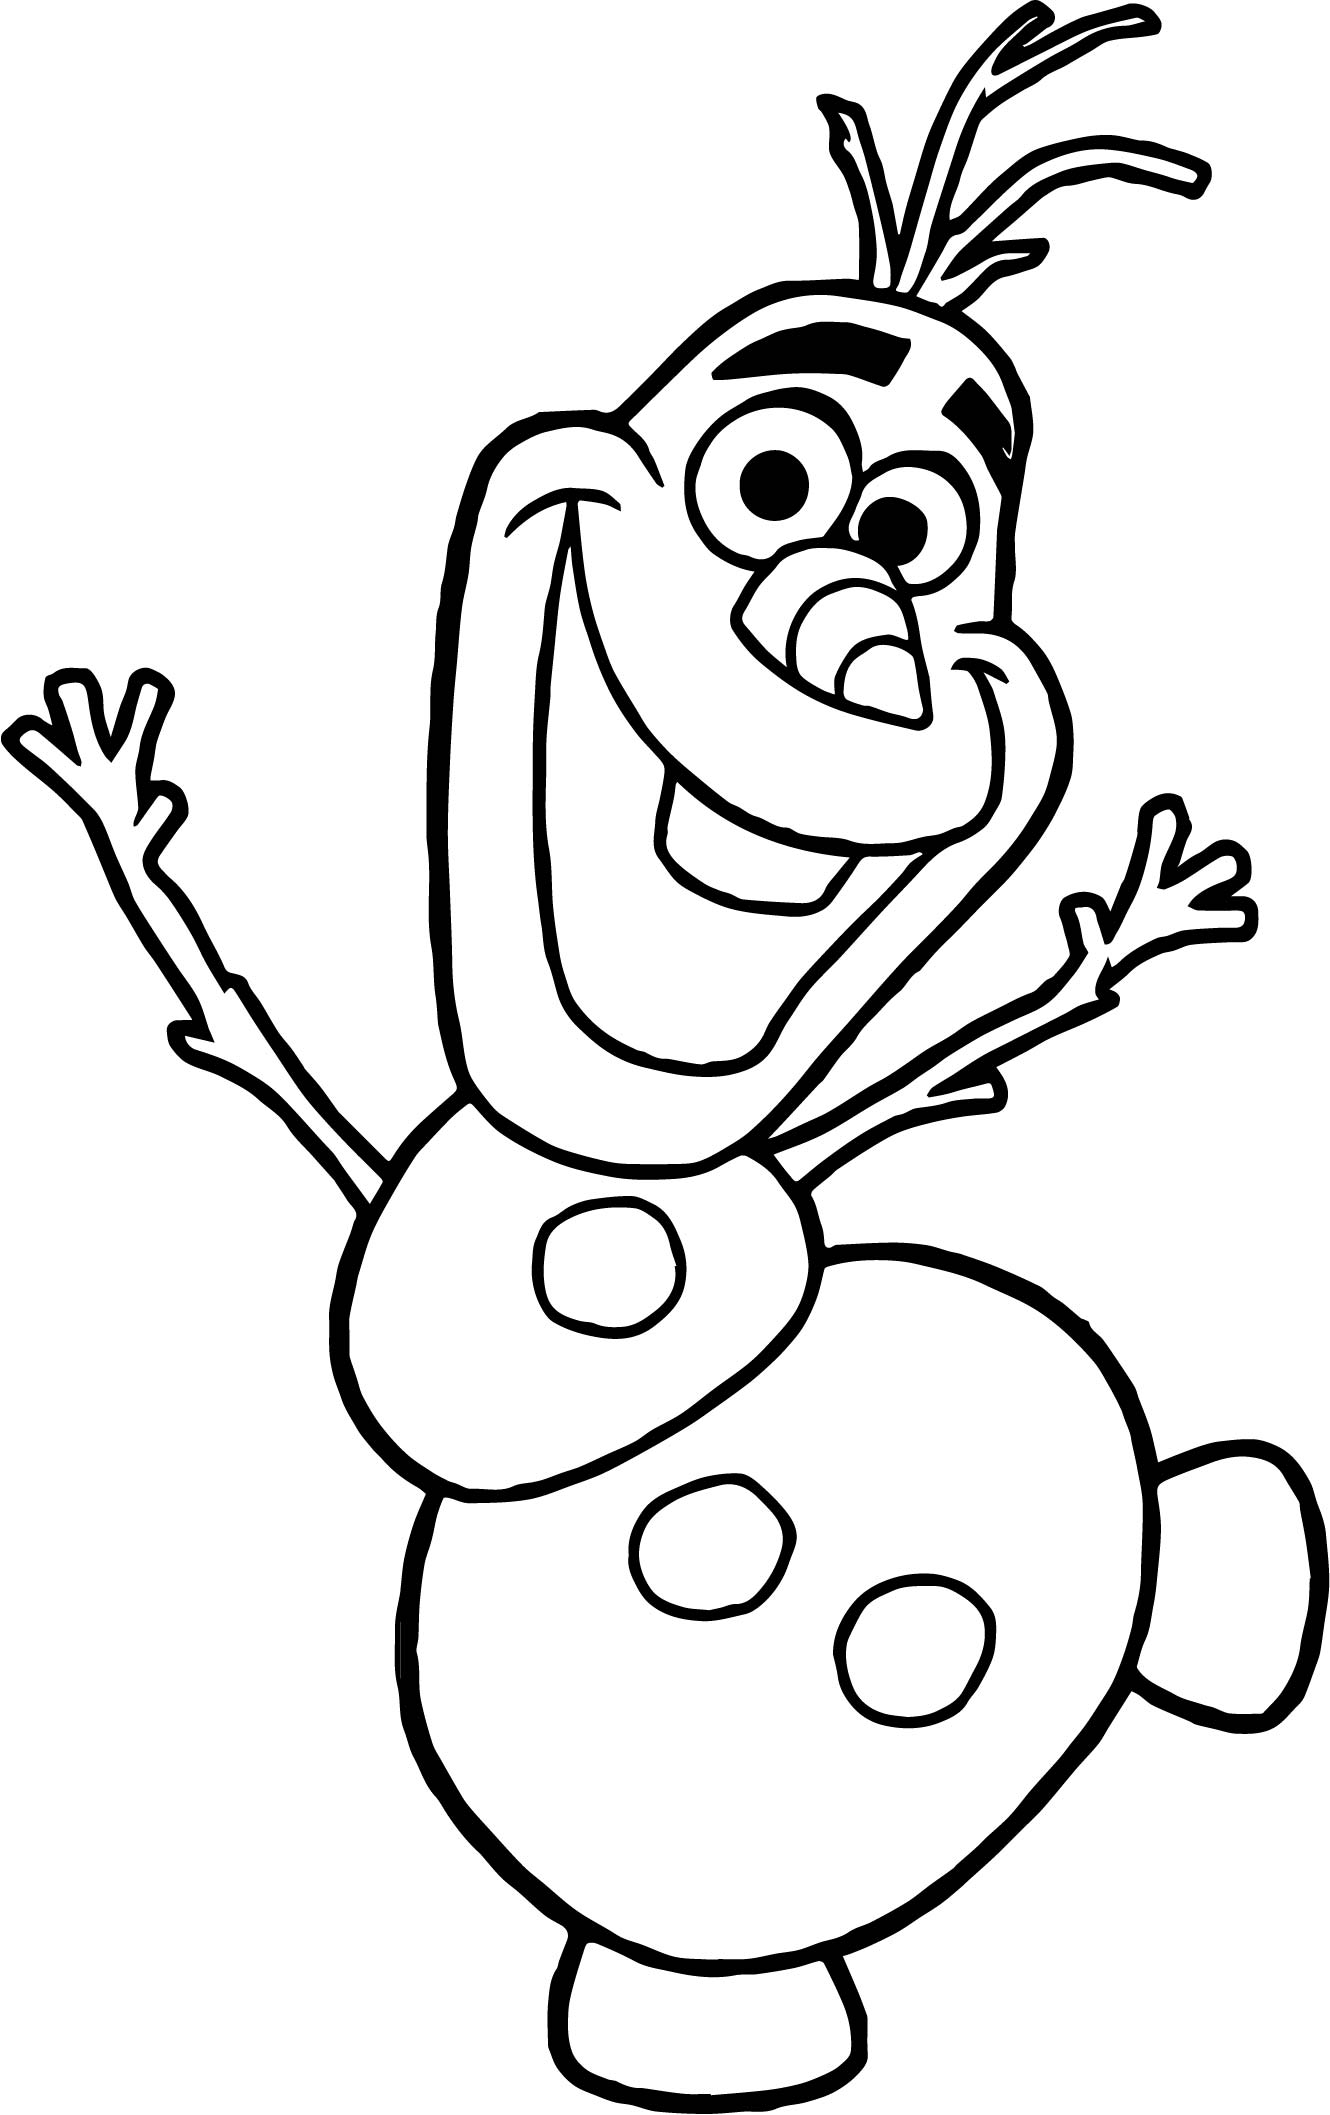 olaf coloring page olaf dance coloring page wecoloringpagecom coloring page olaf 